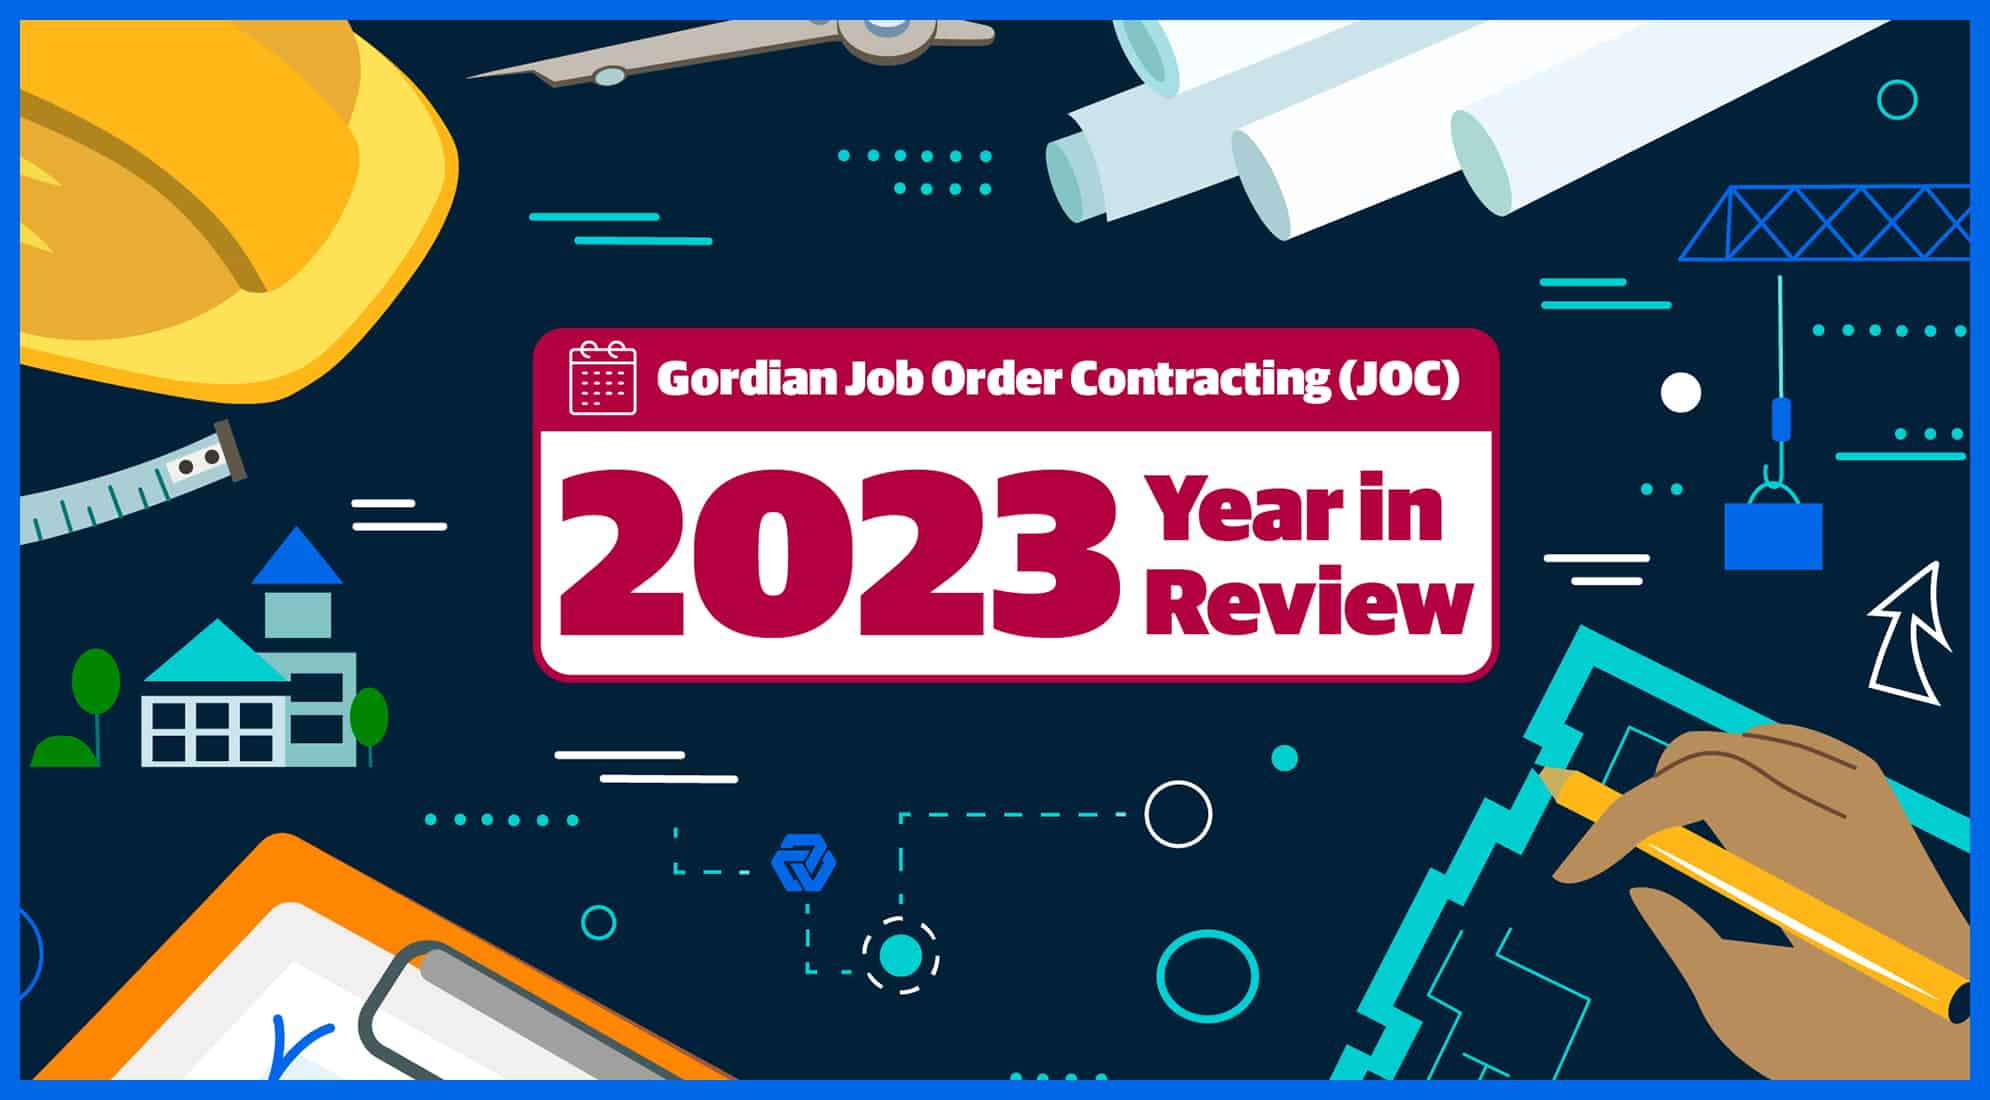 Gordian’s 2023 Job Order Contracting Year in Review